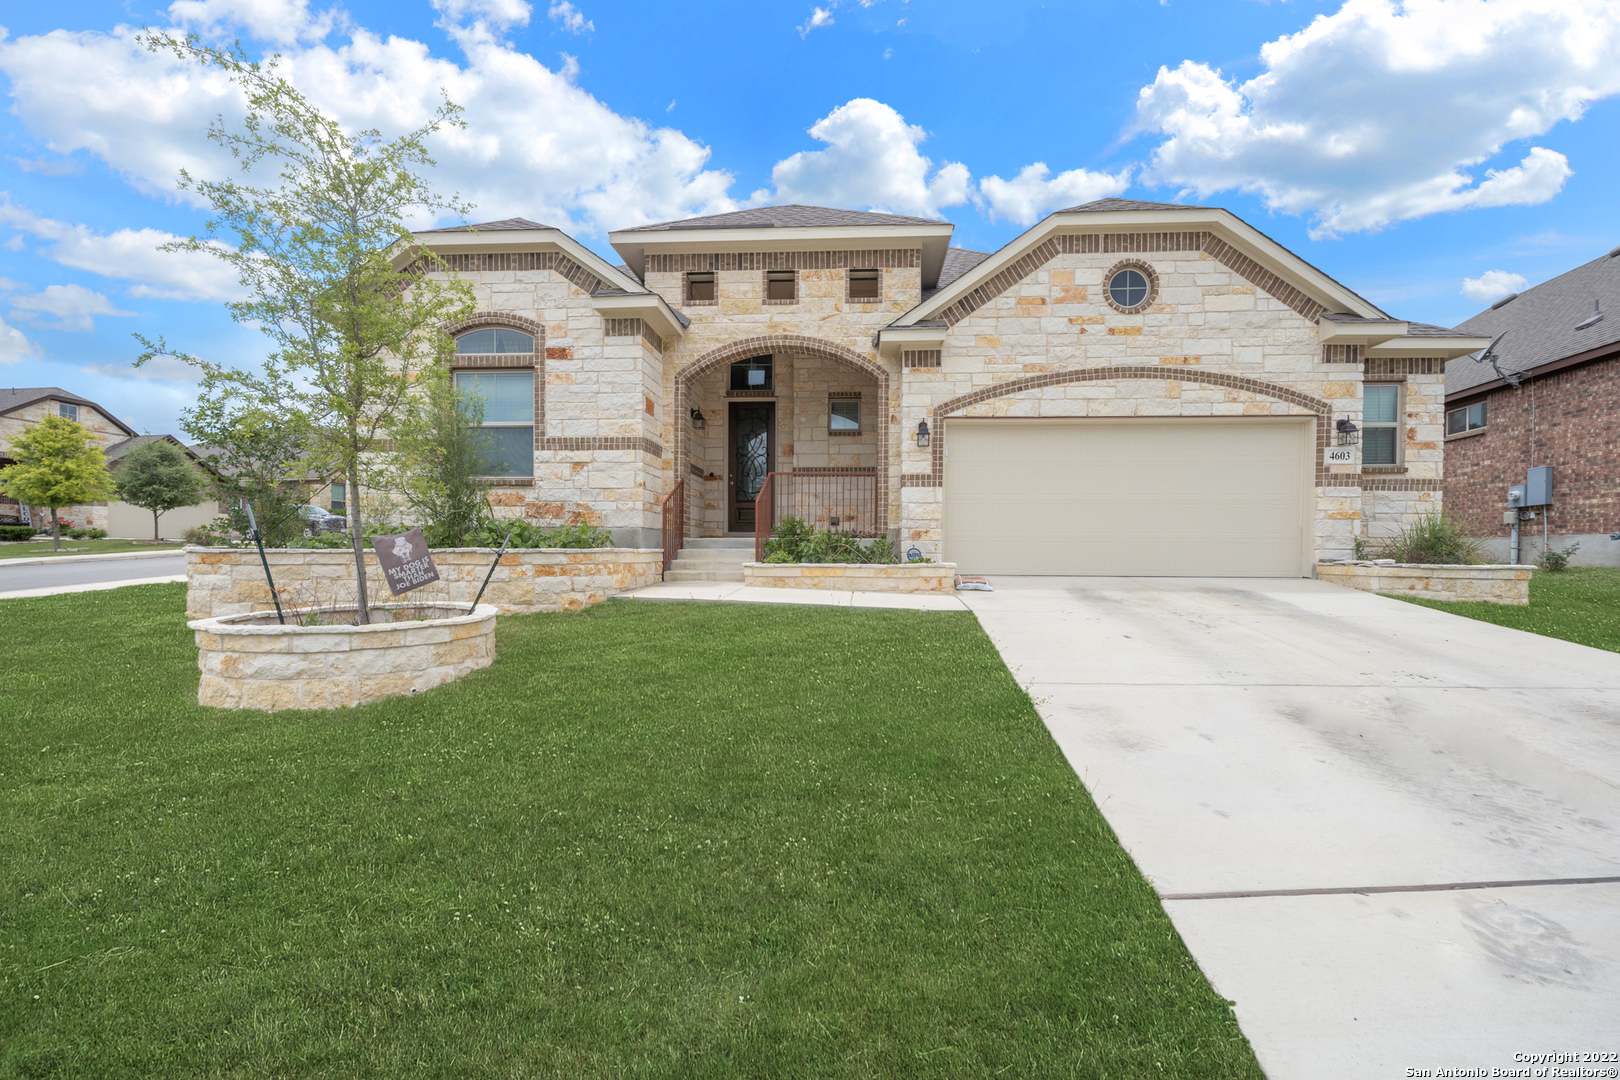 Take a look at this beauty in Santa Maria at Alamo Ranch!  On the first floor, this home features a grand entrance with unique chandelier, an open and airy floorplan, tons of natural light, a spacious living room that opens up to the highly functional kitchen with a massive island, a separate office or dining room, a large primary bedroom with high ceilings and a spa-like bathroom with dual vanities, an oversized shower and walk in closet, a secondary bedroom with its own ensuite restroom and a third secondary bedroom near a the hall bathroom.  On the second floor, there is a Texas sized loft with a wall of windows and an adjoining media/game room with its own full 4th bathroom that could easily be turned into a 4th bedroom if needed!